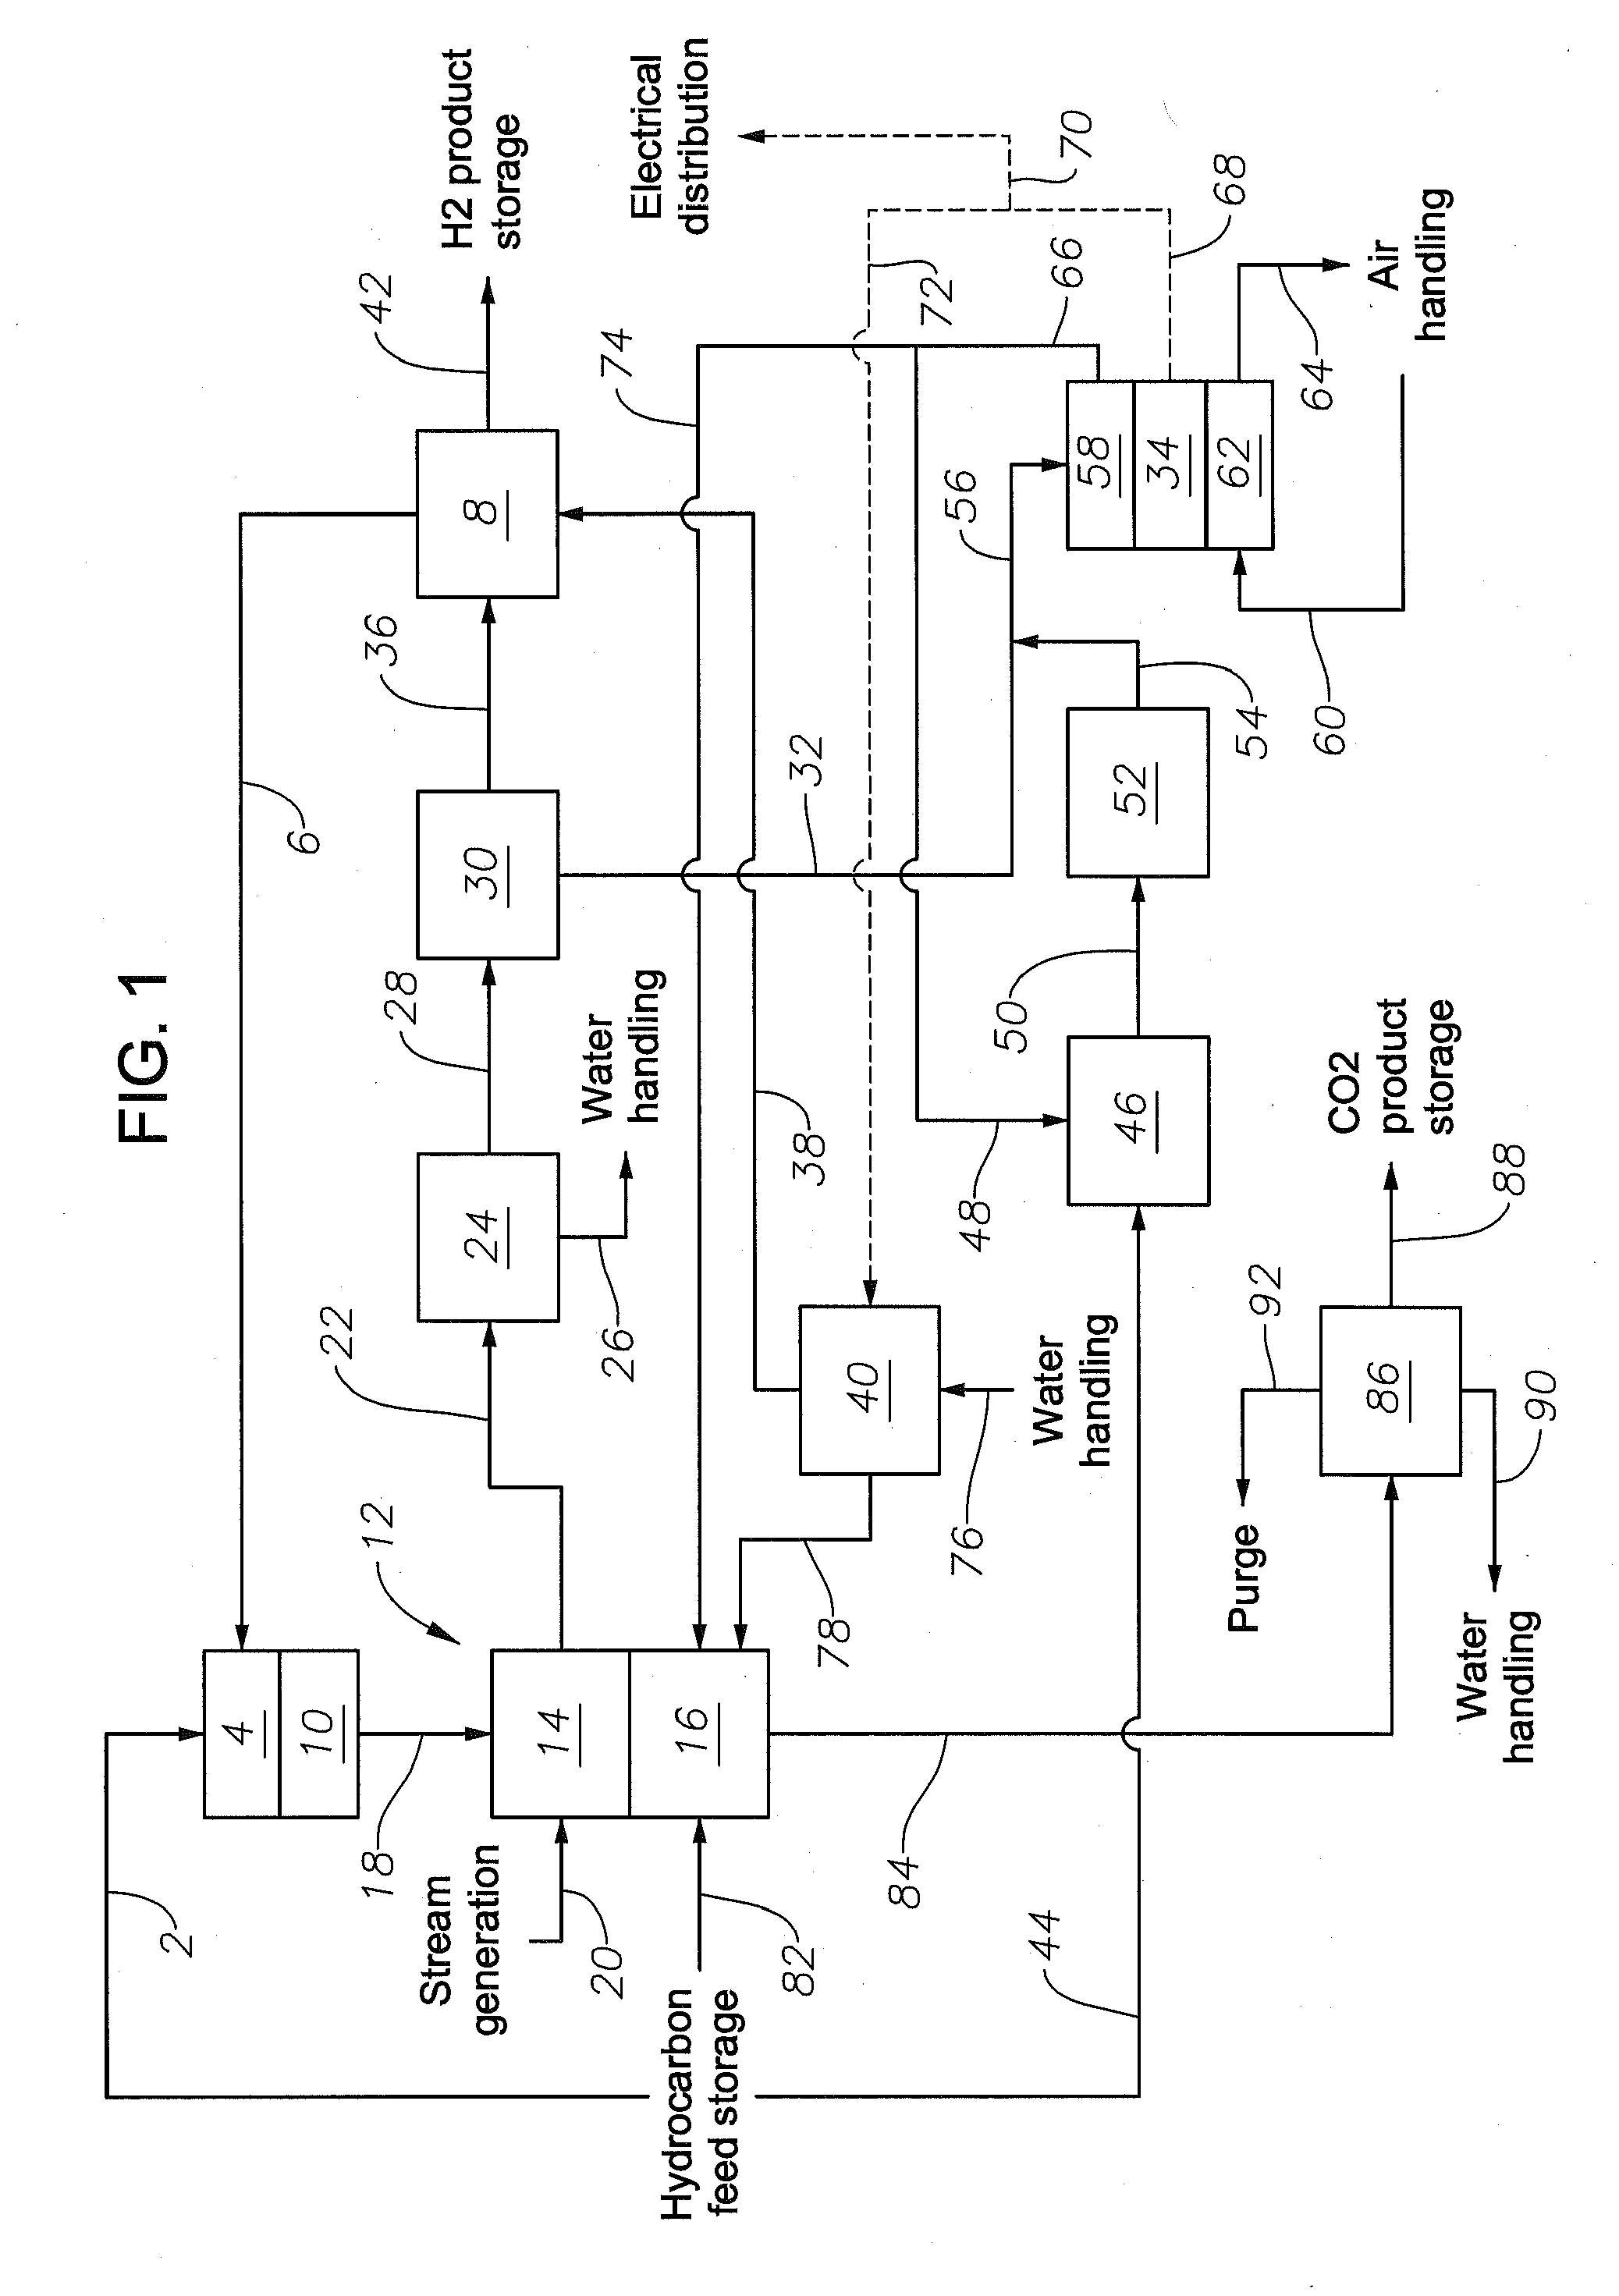 Method and a system for combined hydrogen and electricity production using petroleum fuels